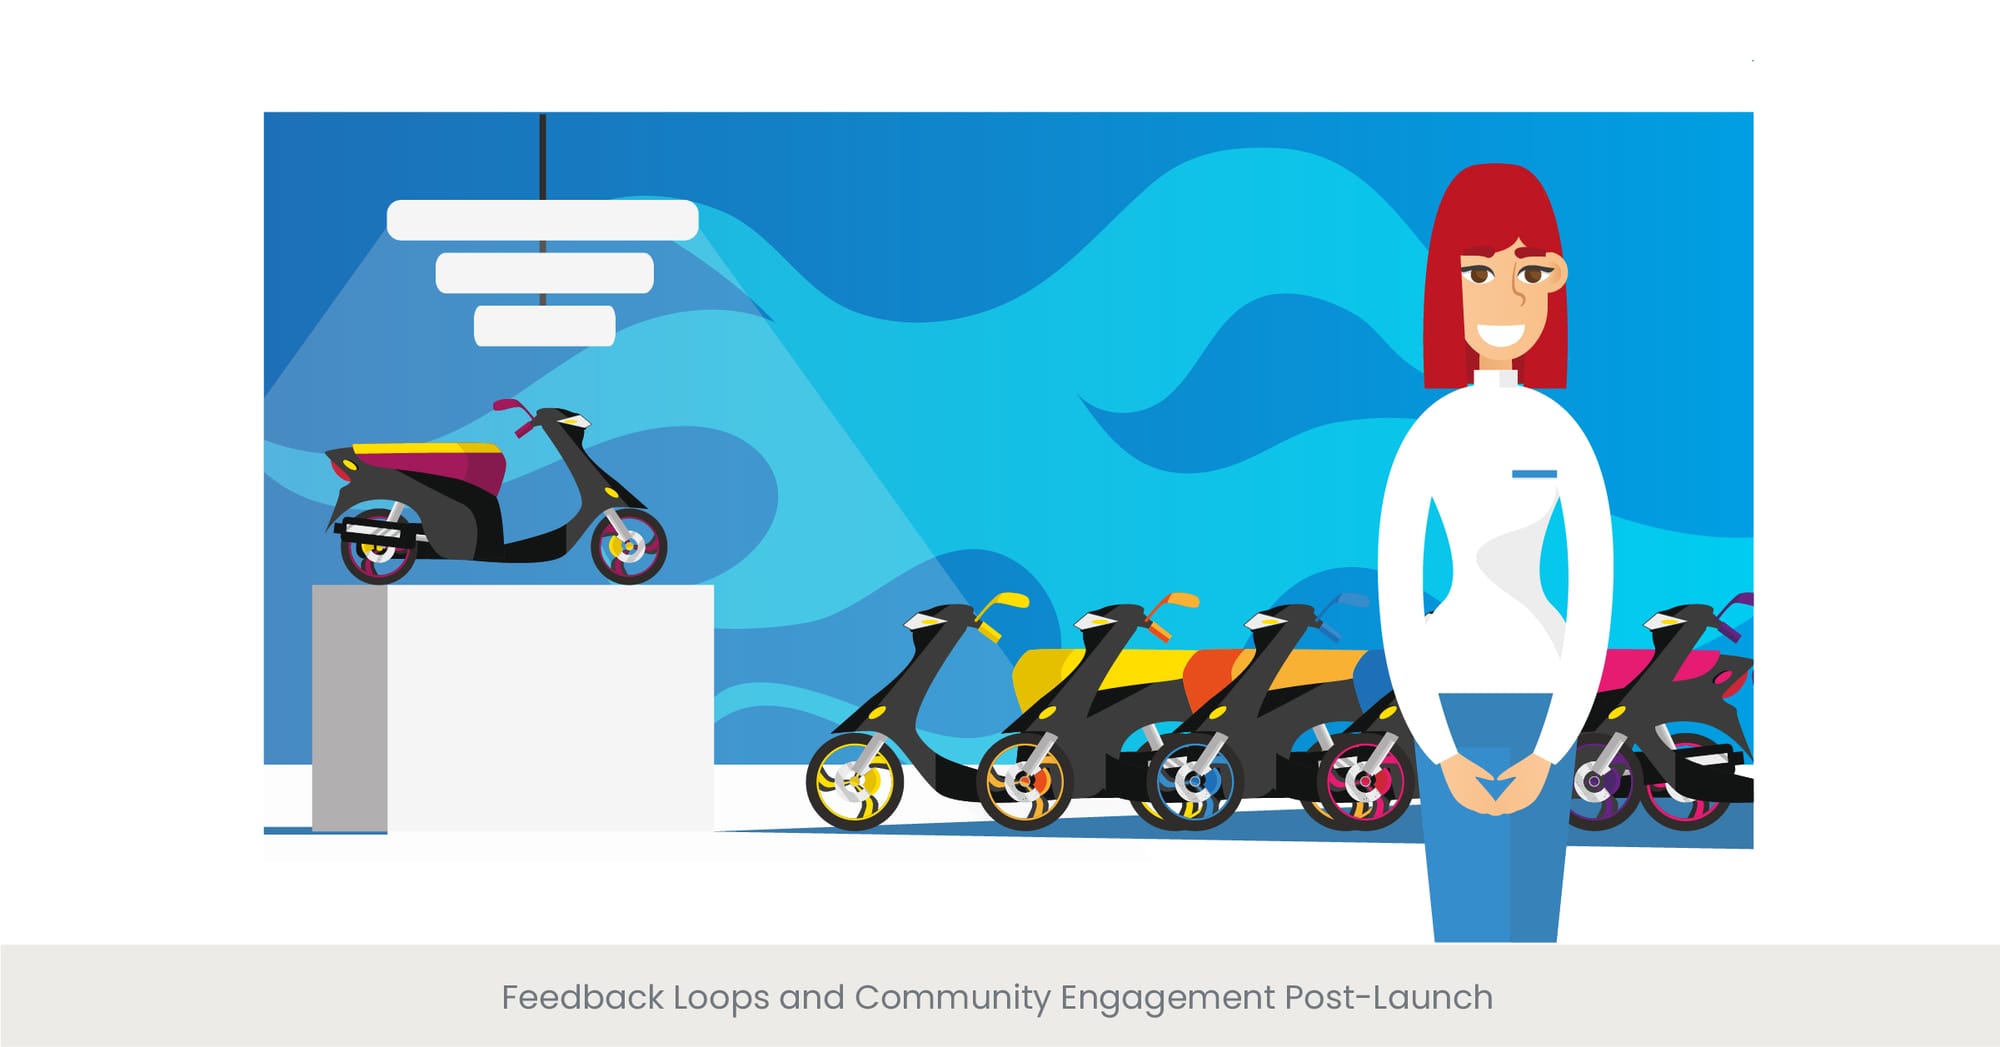 Feedback Loops and Community Engagement Post-Launch